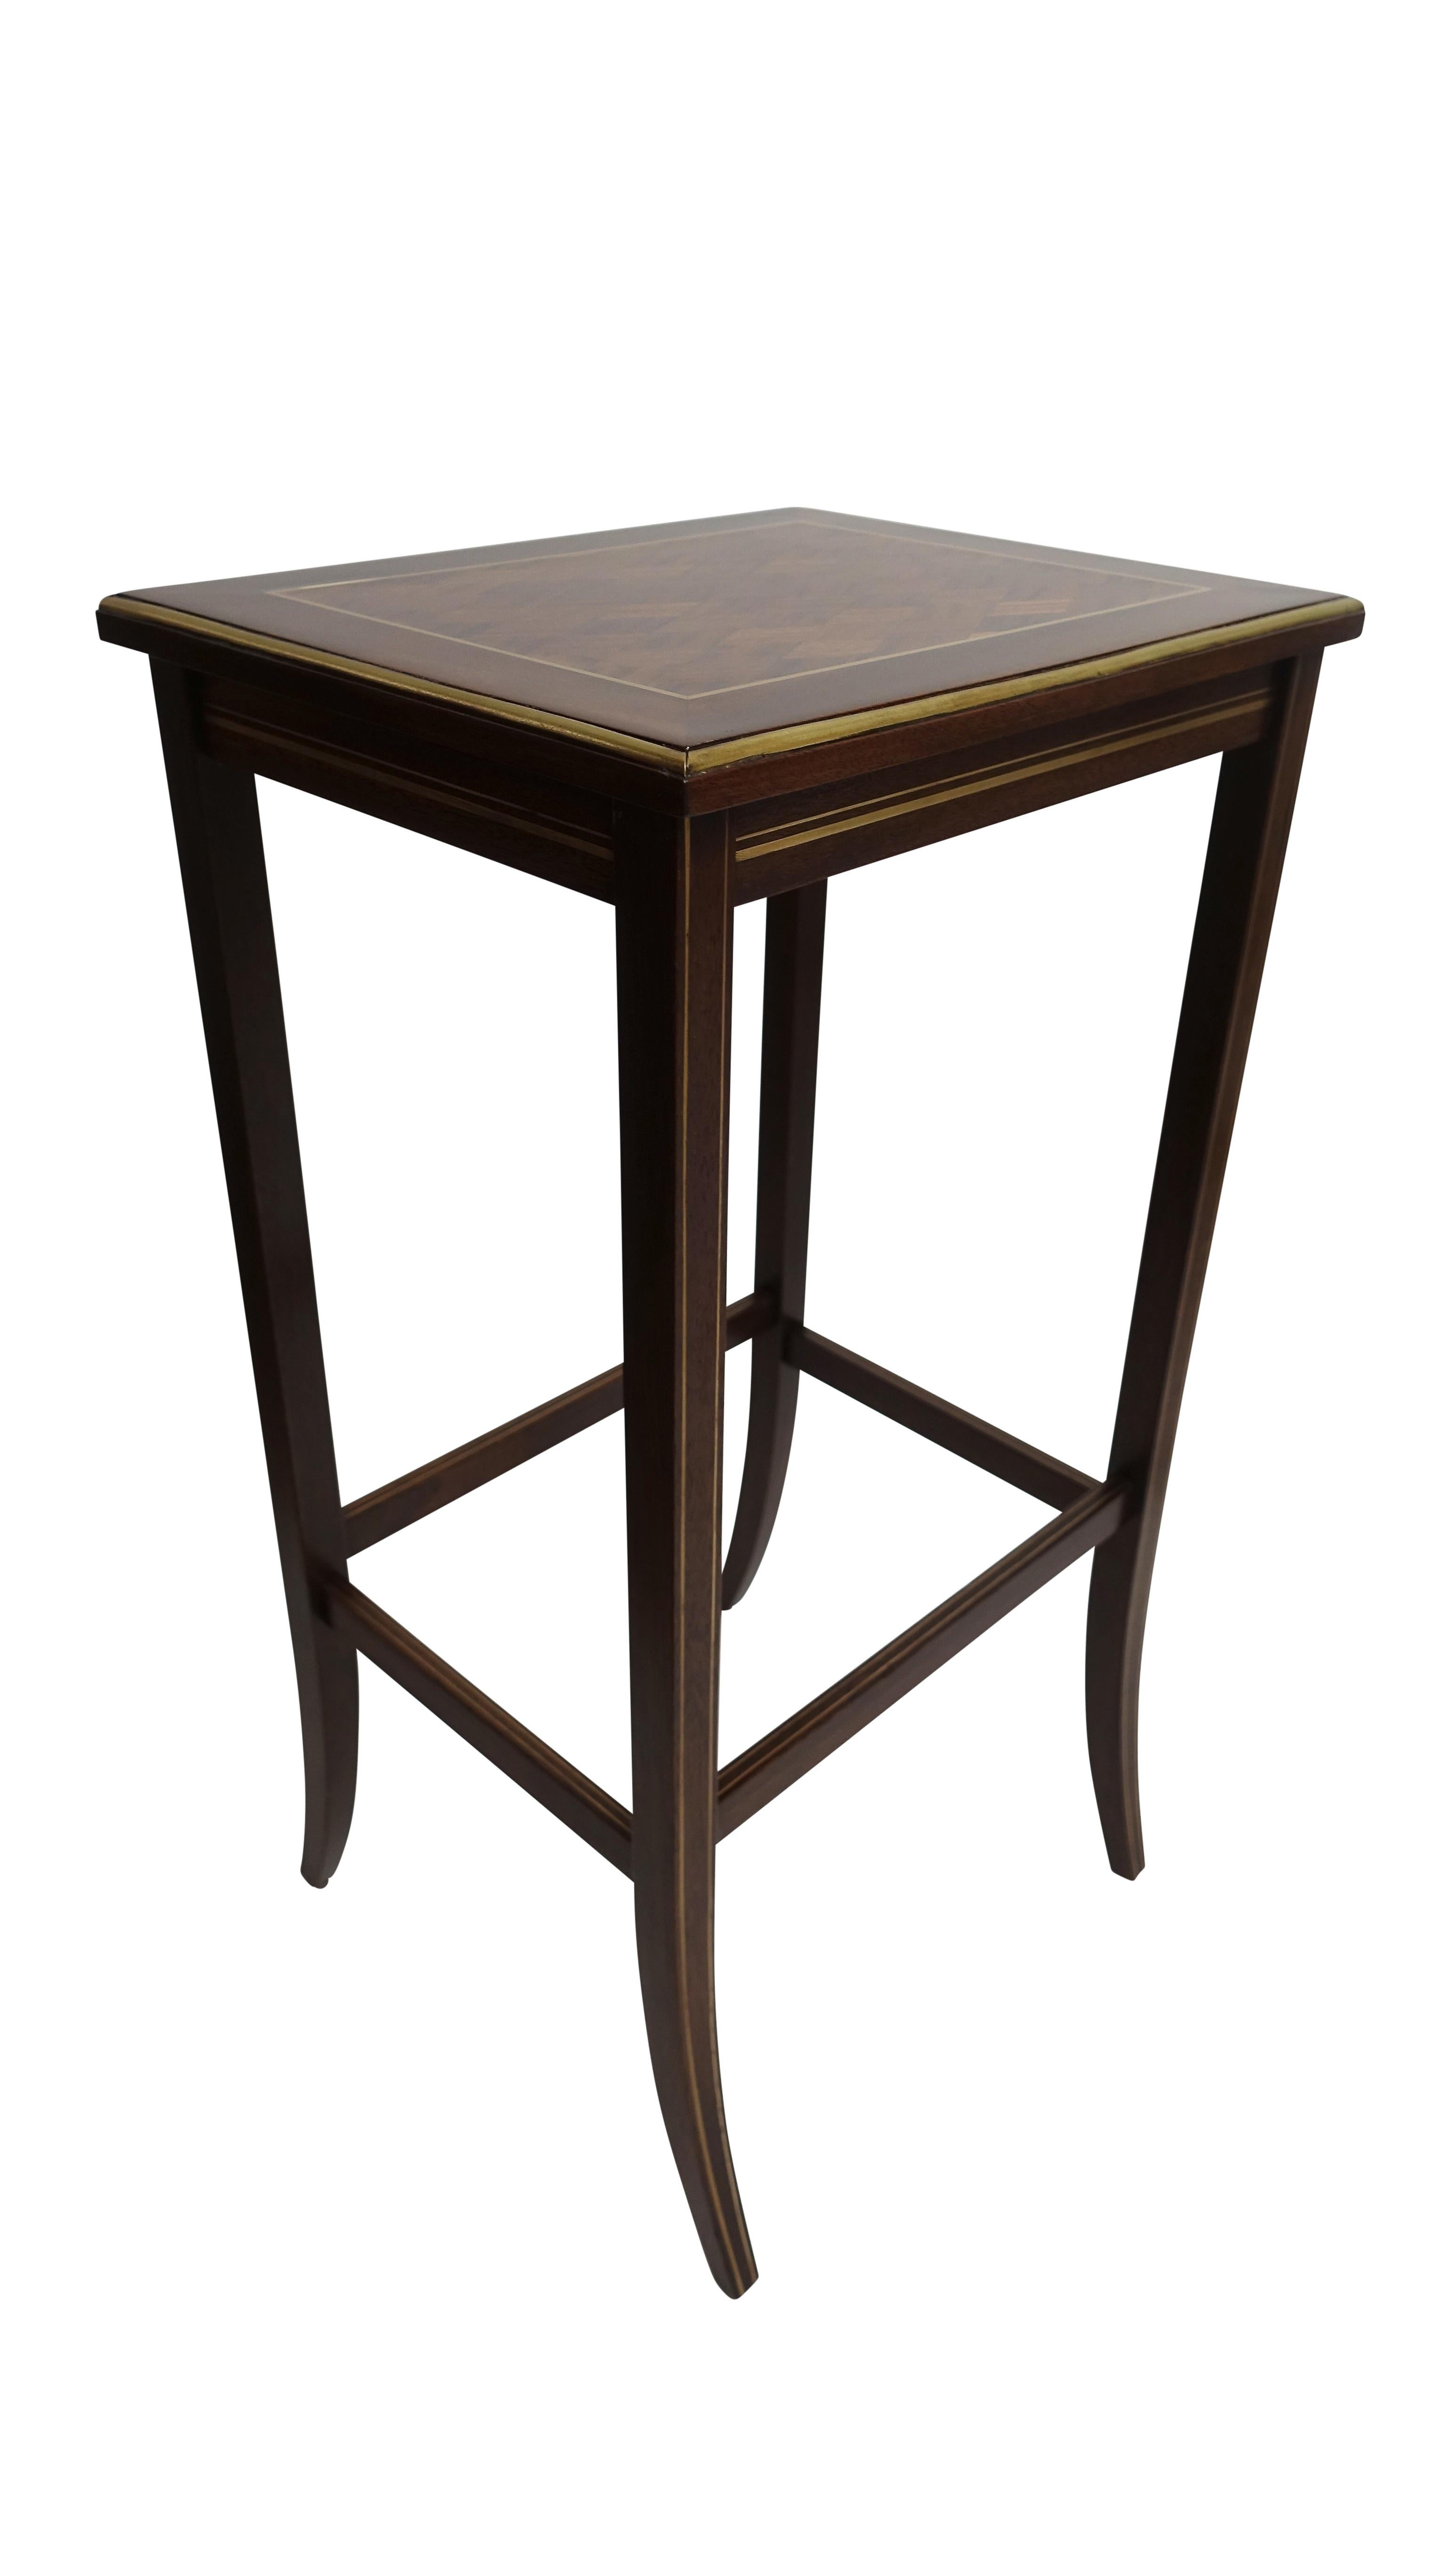 American Set of Four Mahogany Nesting Tables with Brass Inlay and Trim, Mid-20th Century For Sale